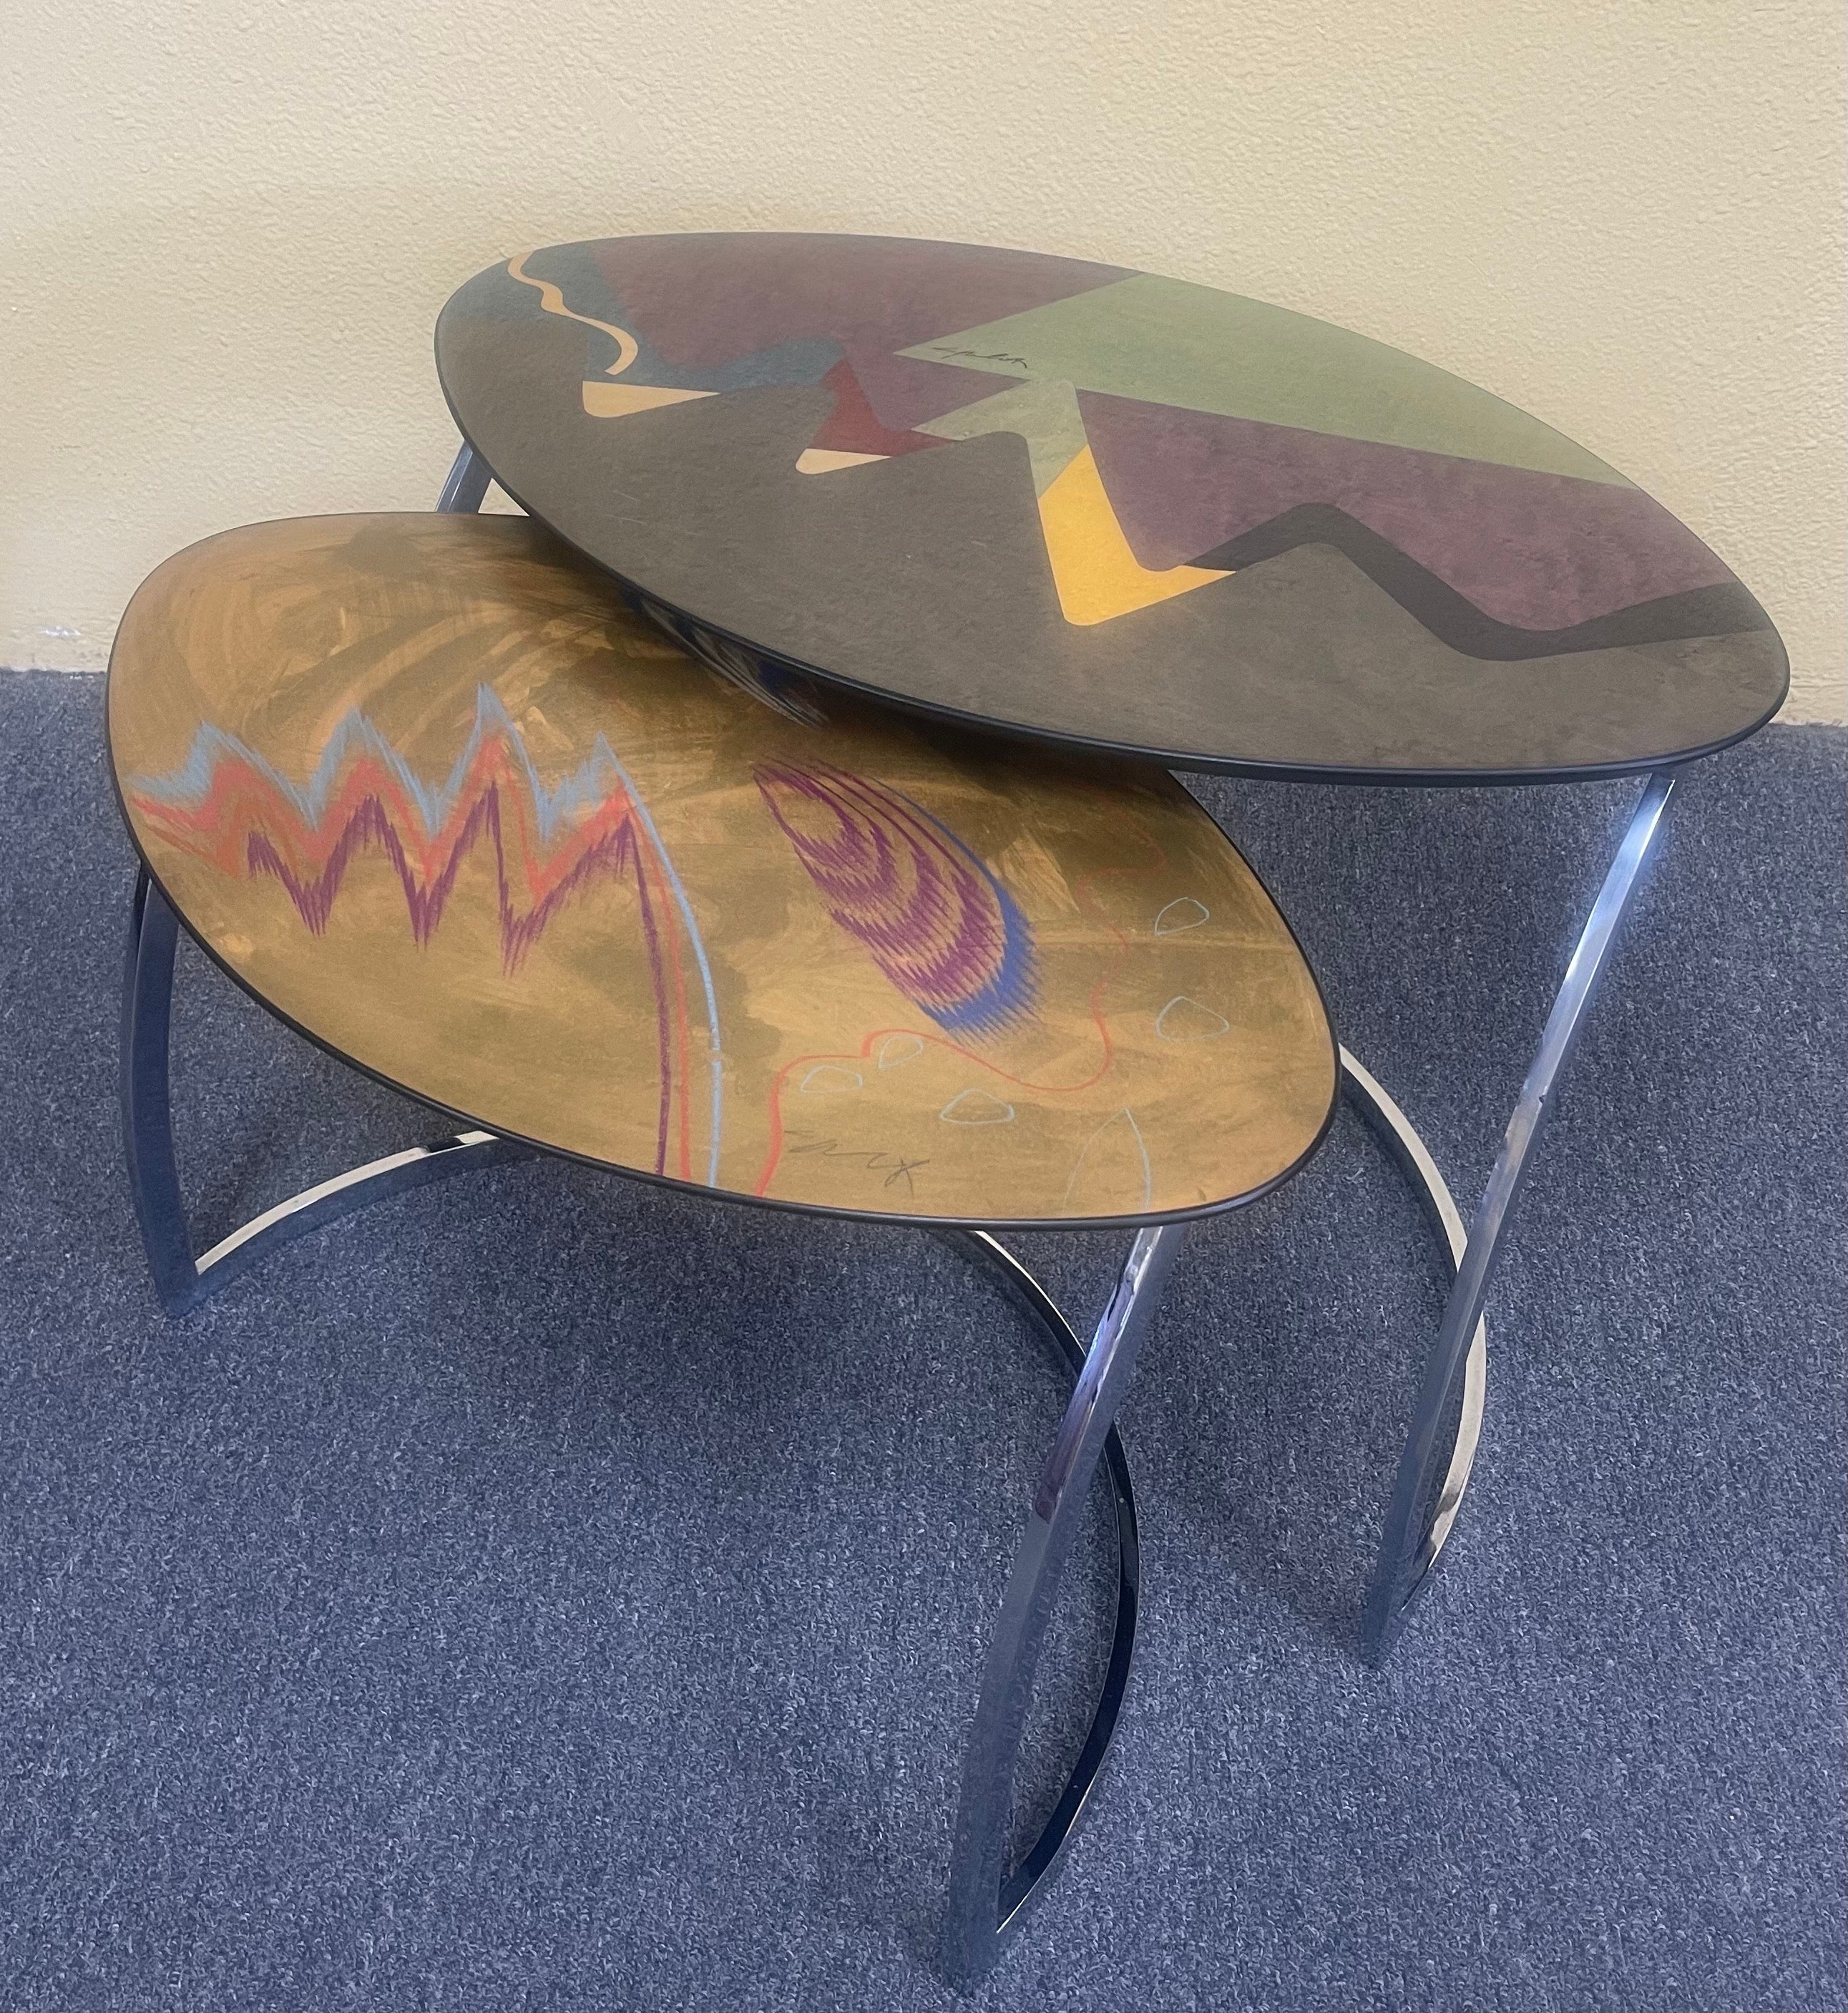 Stunning pair of Italian post-modern lacquered nesting tables signed by Pietro Costantini, circa 1990s. The table tops are made of hardwood veneer with a clear high gloss lacquer finish over acrylic painted table top designs (up close, you can see